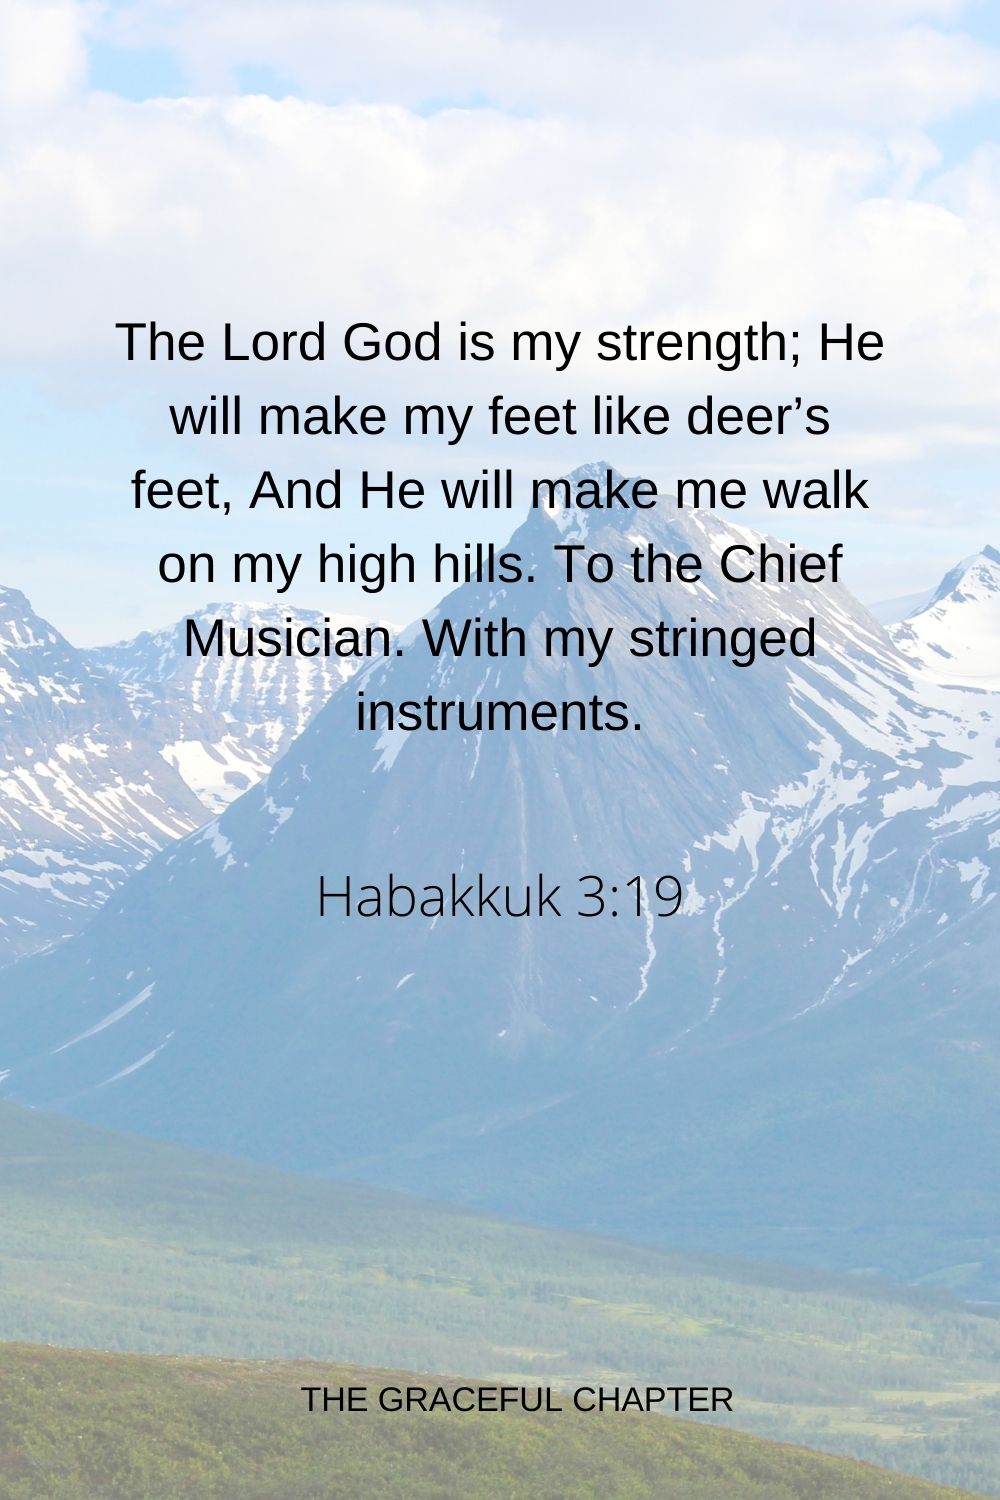 The Lord God is my strength; He will make my feet like deer’s feet, And He will make me walk on my high hills. To the Chief Musician. With my stringed instruments. Habakkuk 3:19